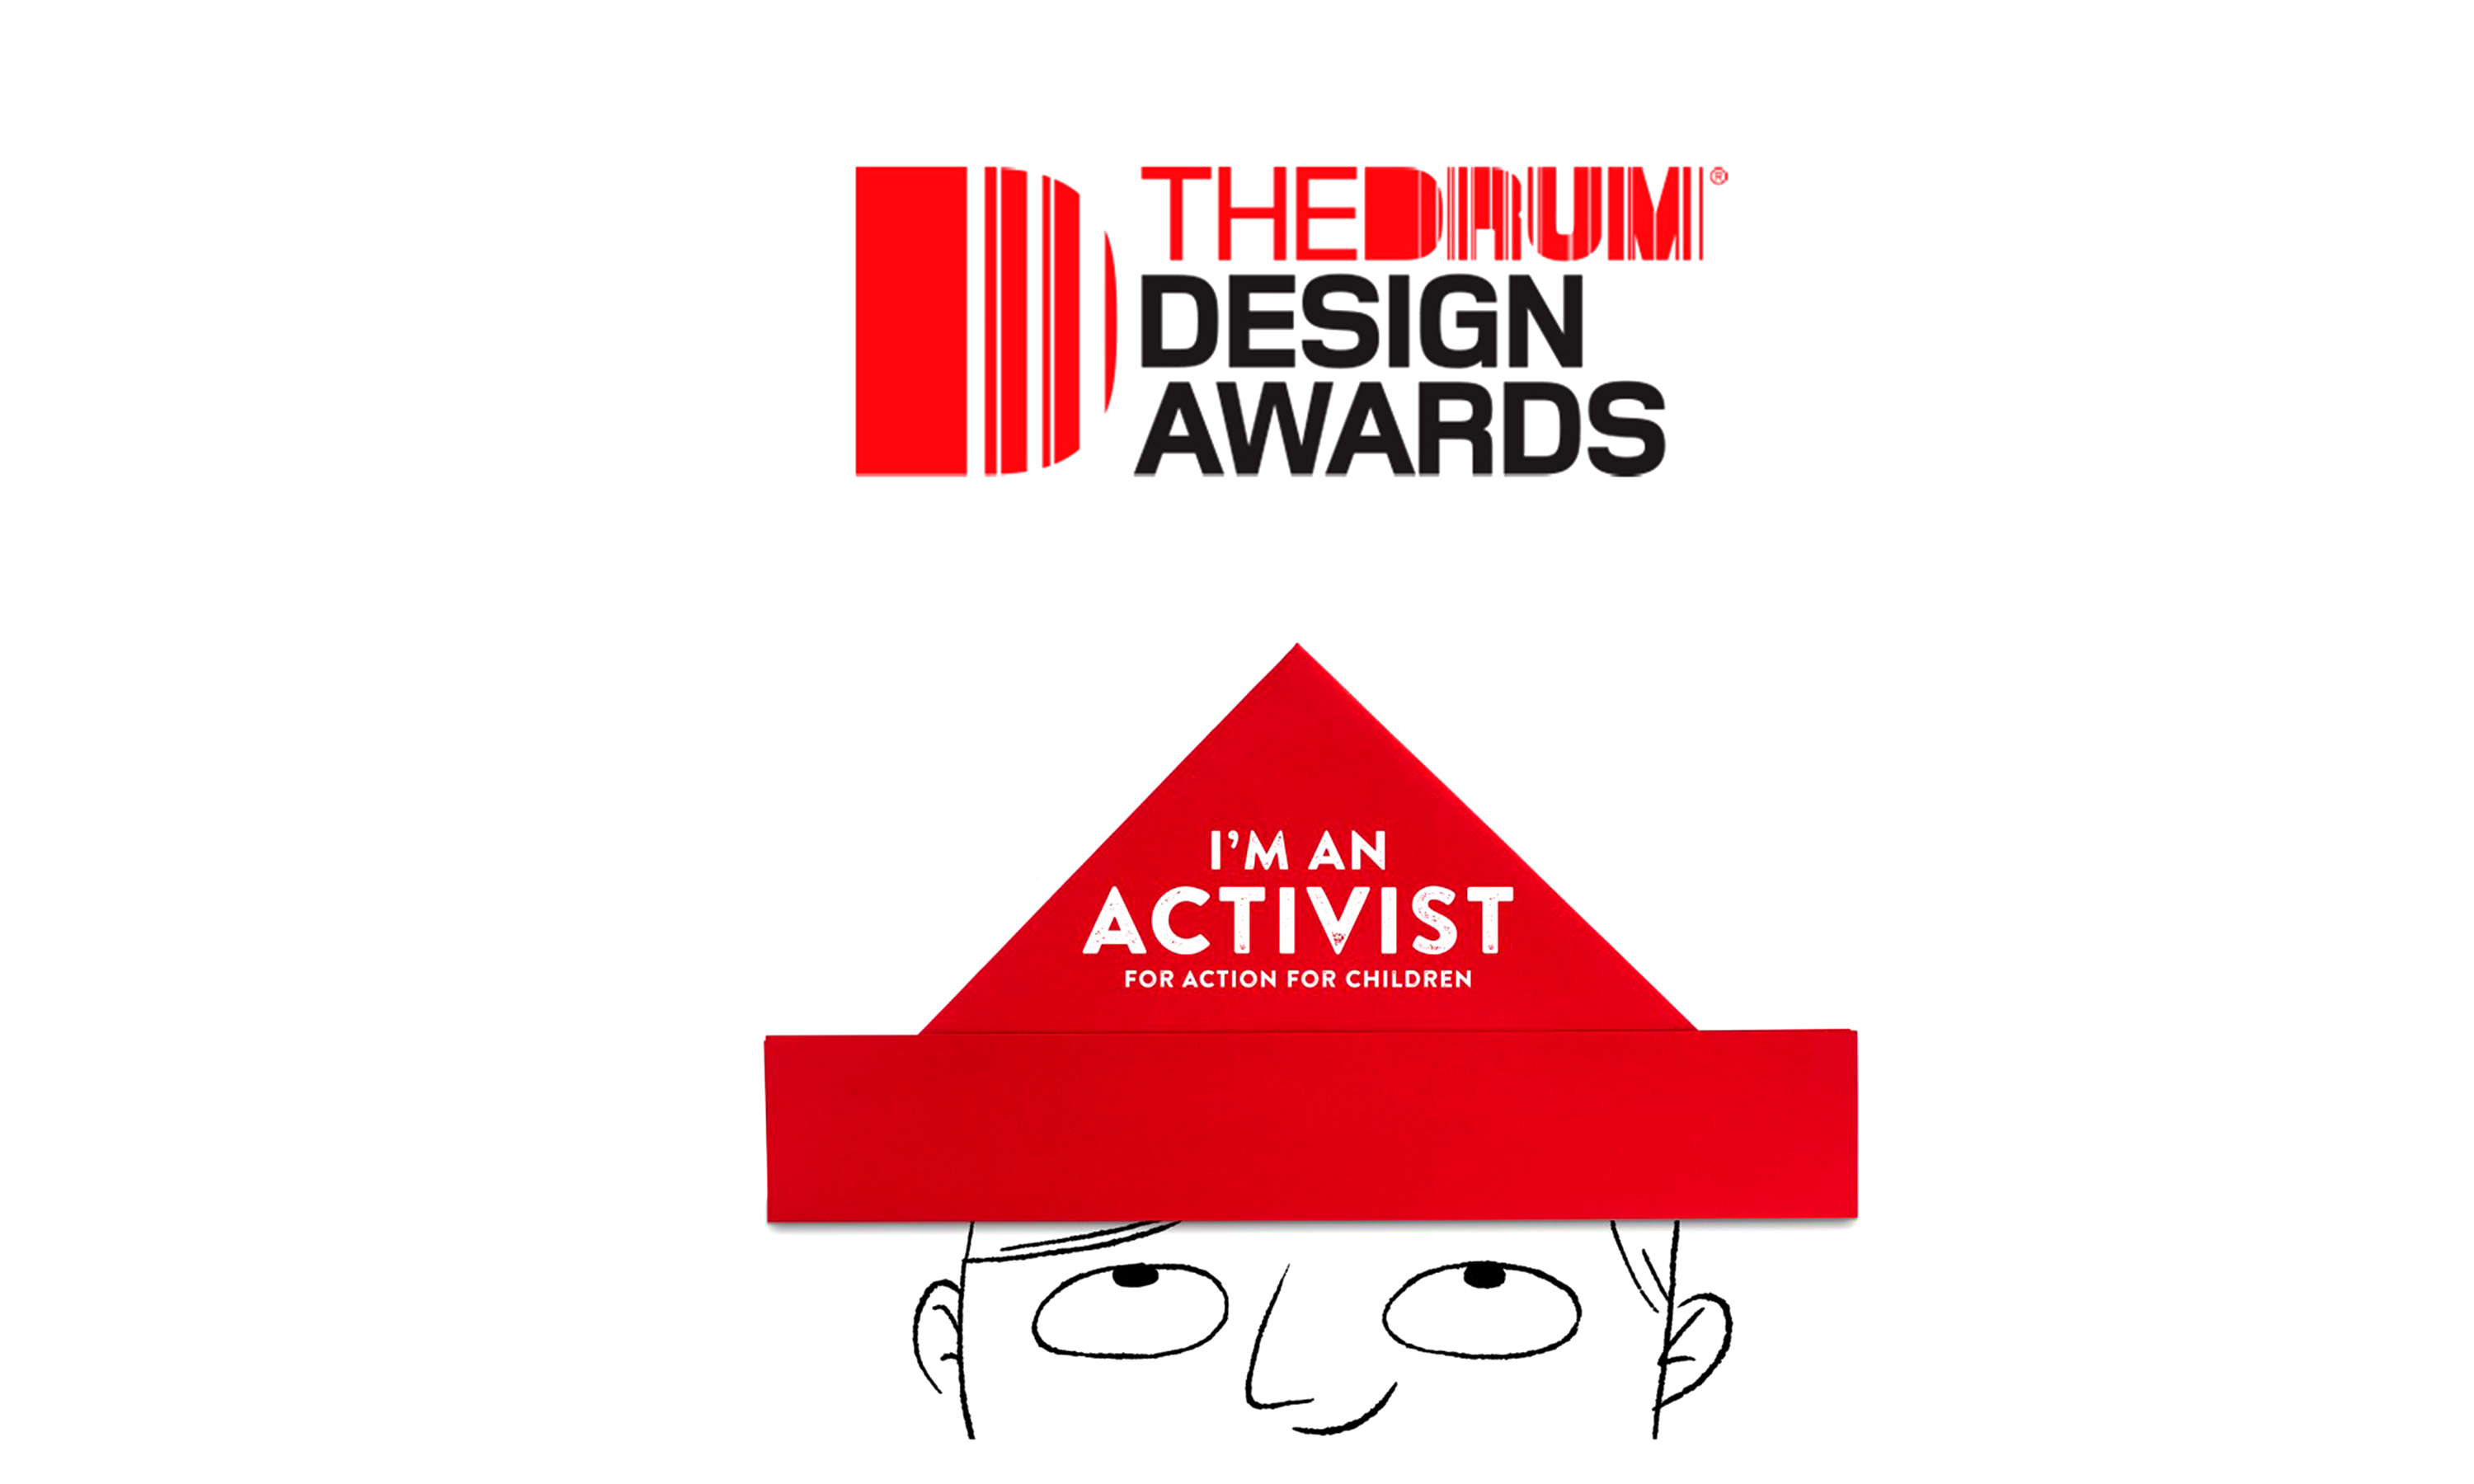 Neon brand consultants are 2017 Drum Design Awards finalists for Action for Children brand campaign and moving image